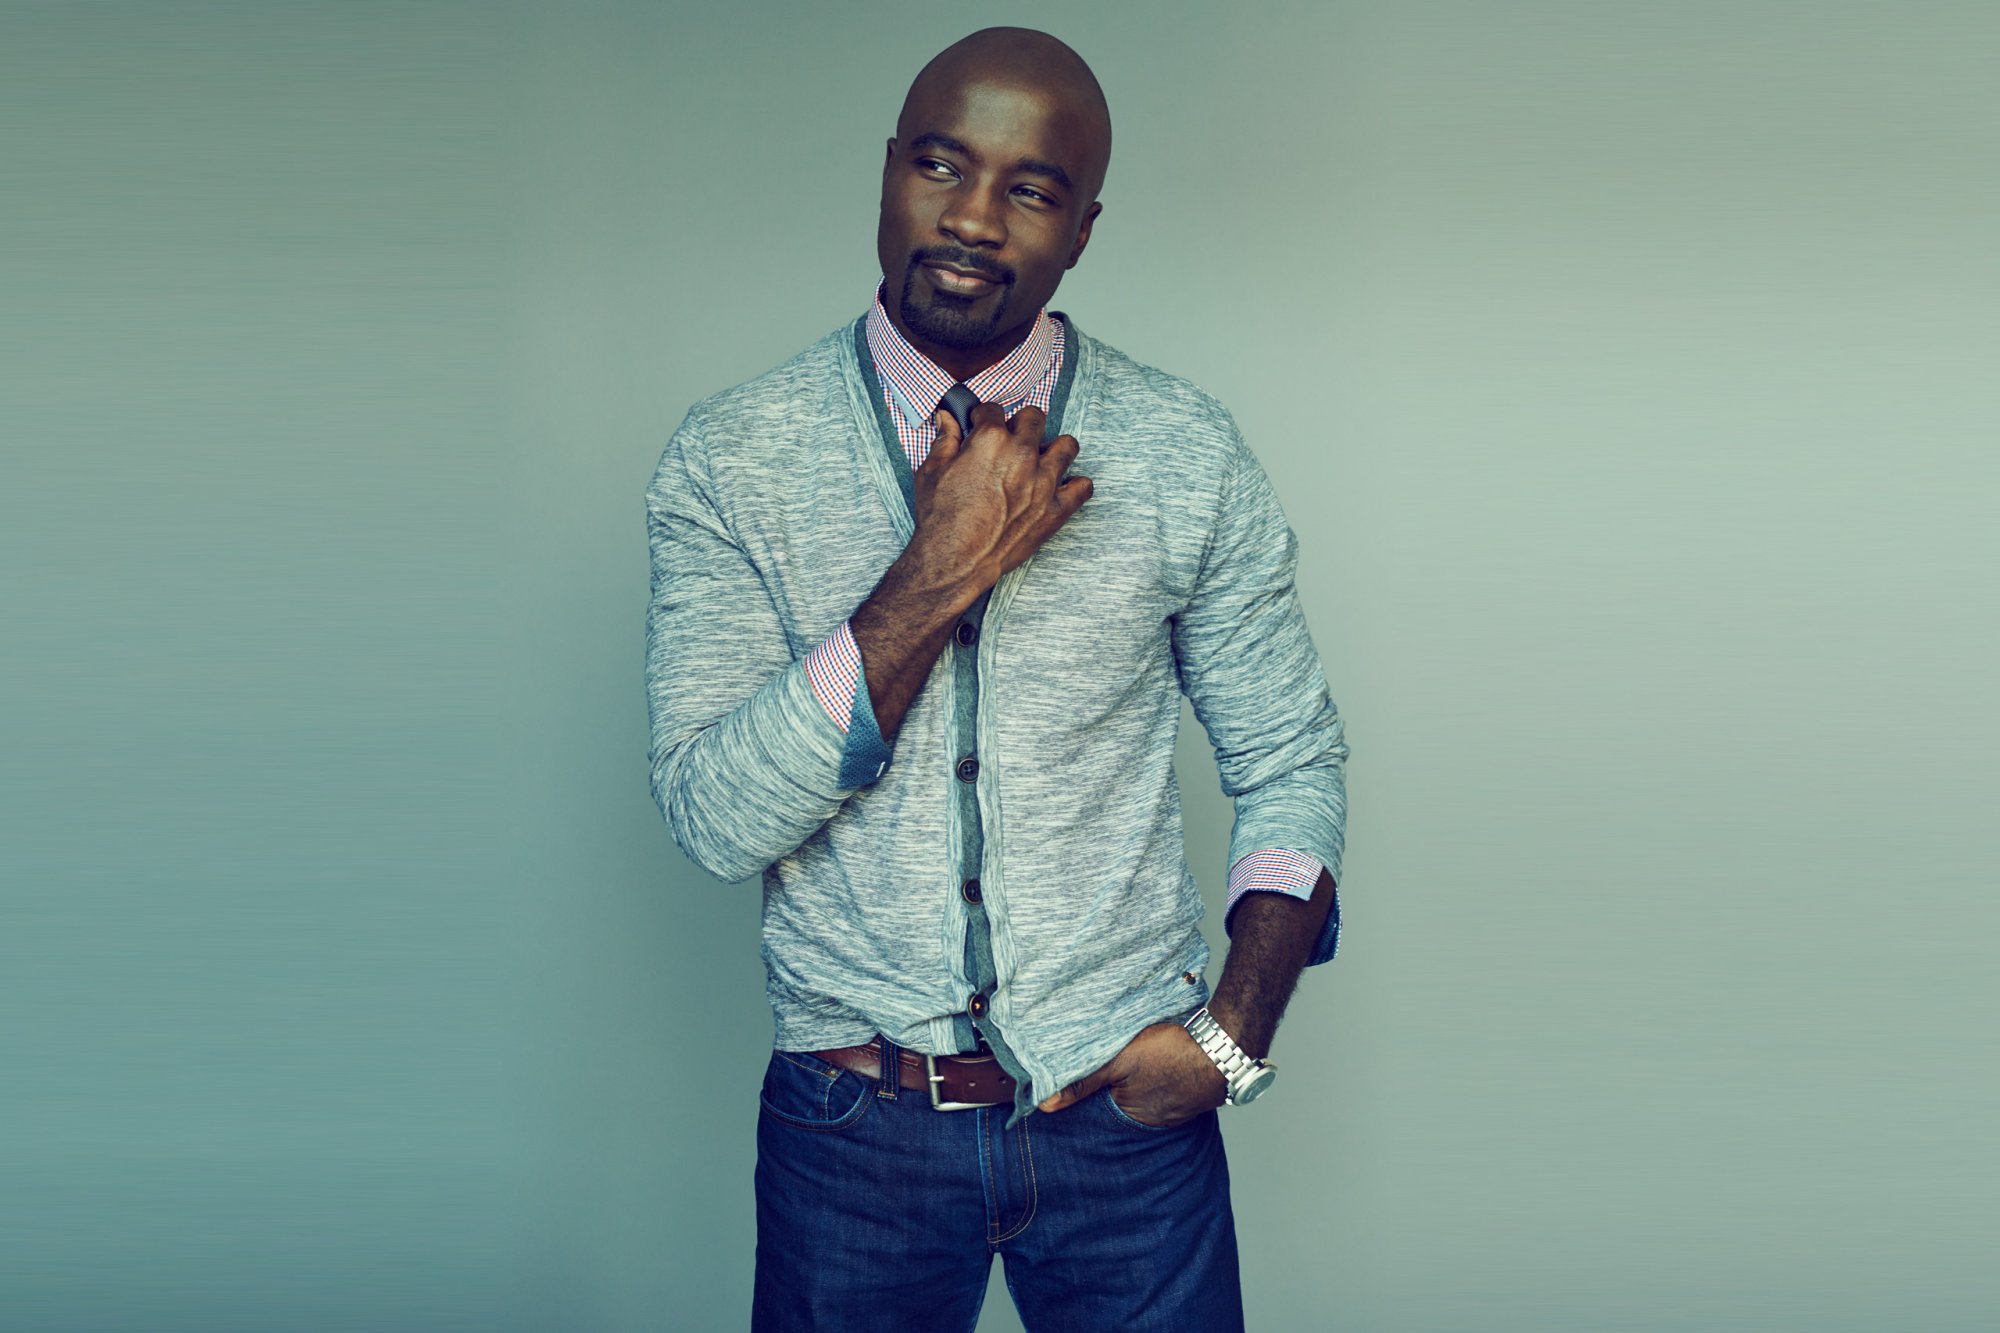 Mike Colter Backgrounds, Compatible - PC, Mobile, Gadgets| 2000x1333 px